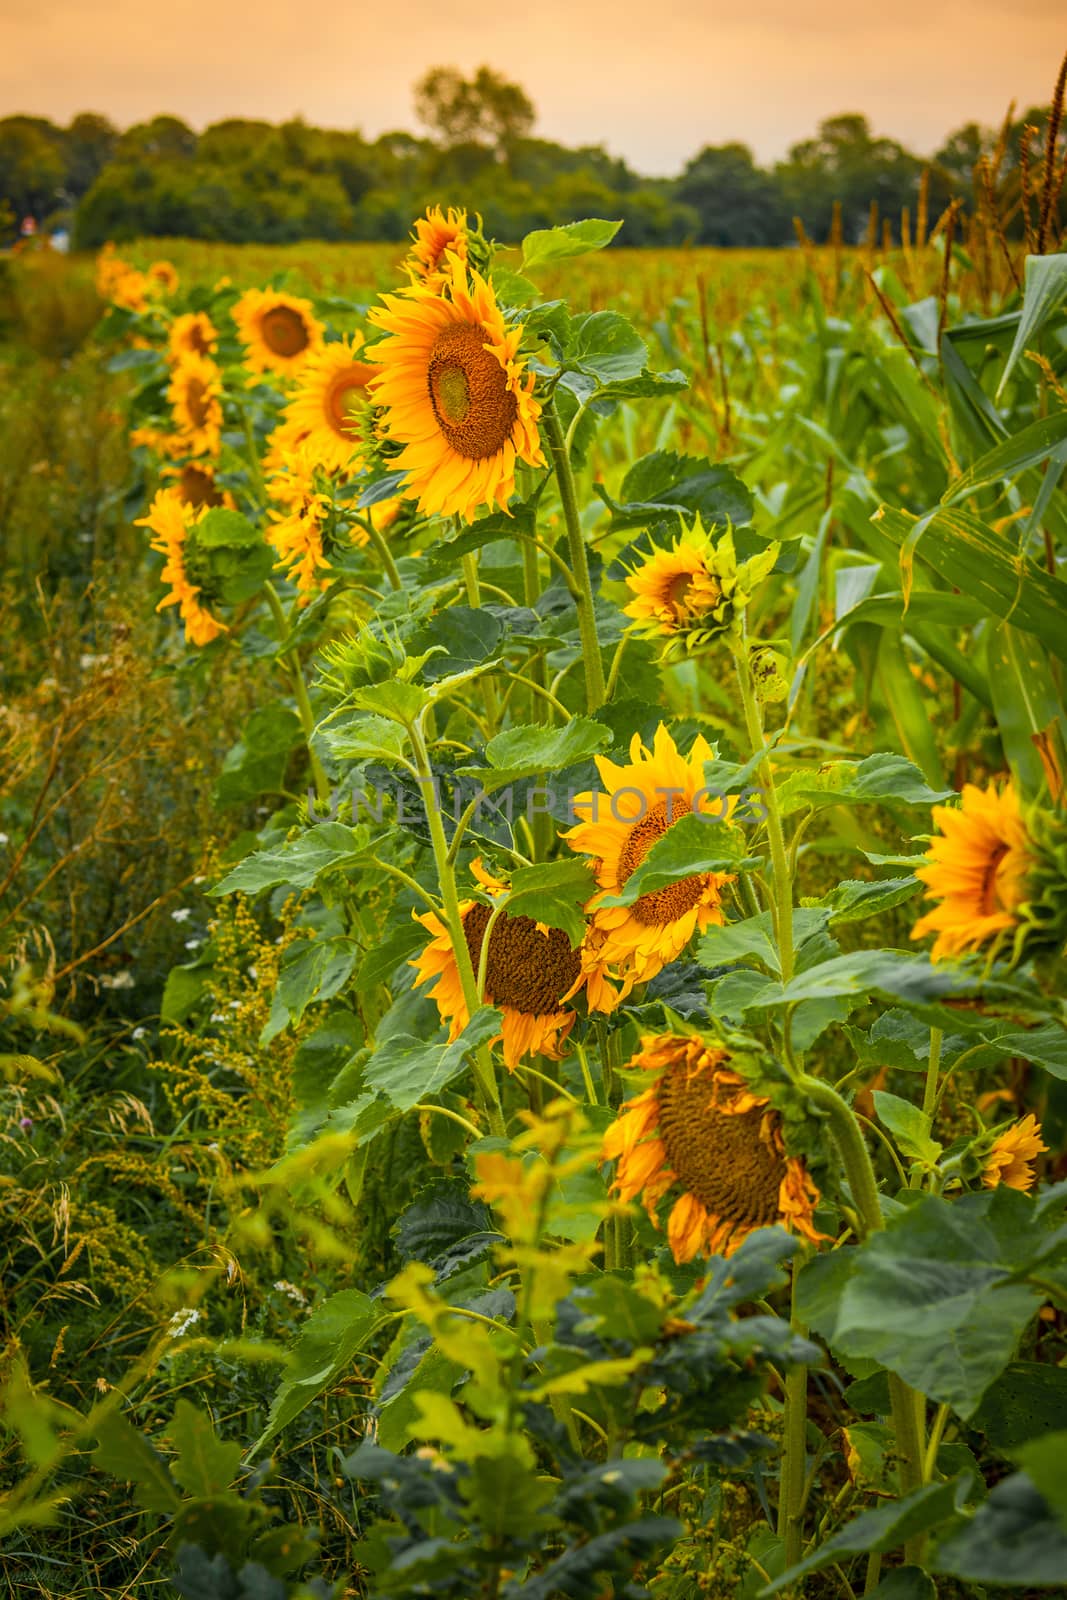 Sunflowers on a green field in the summertime